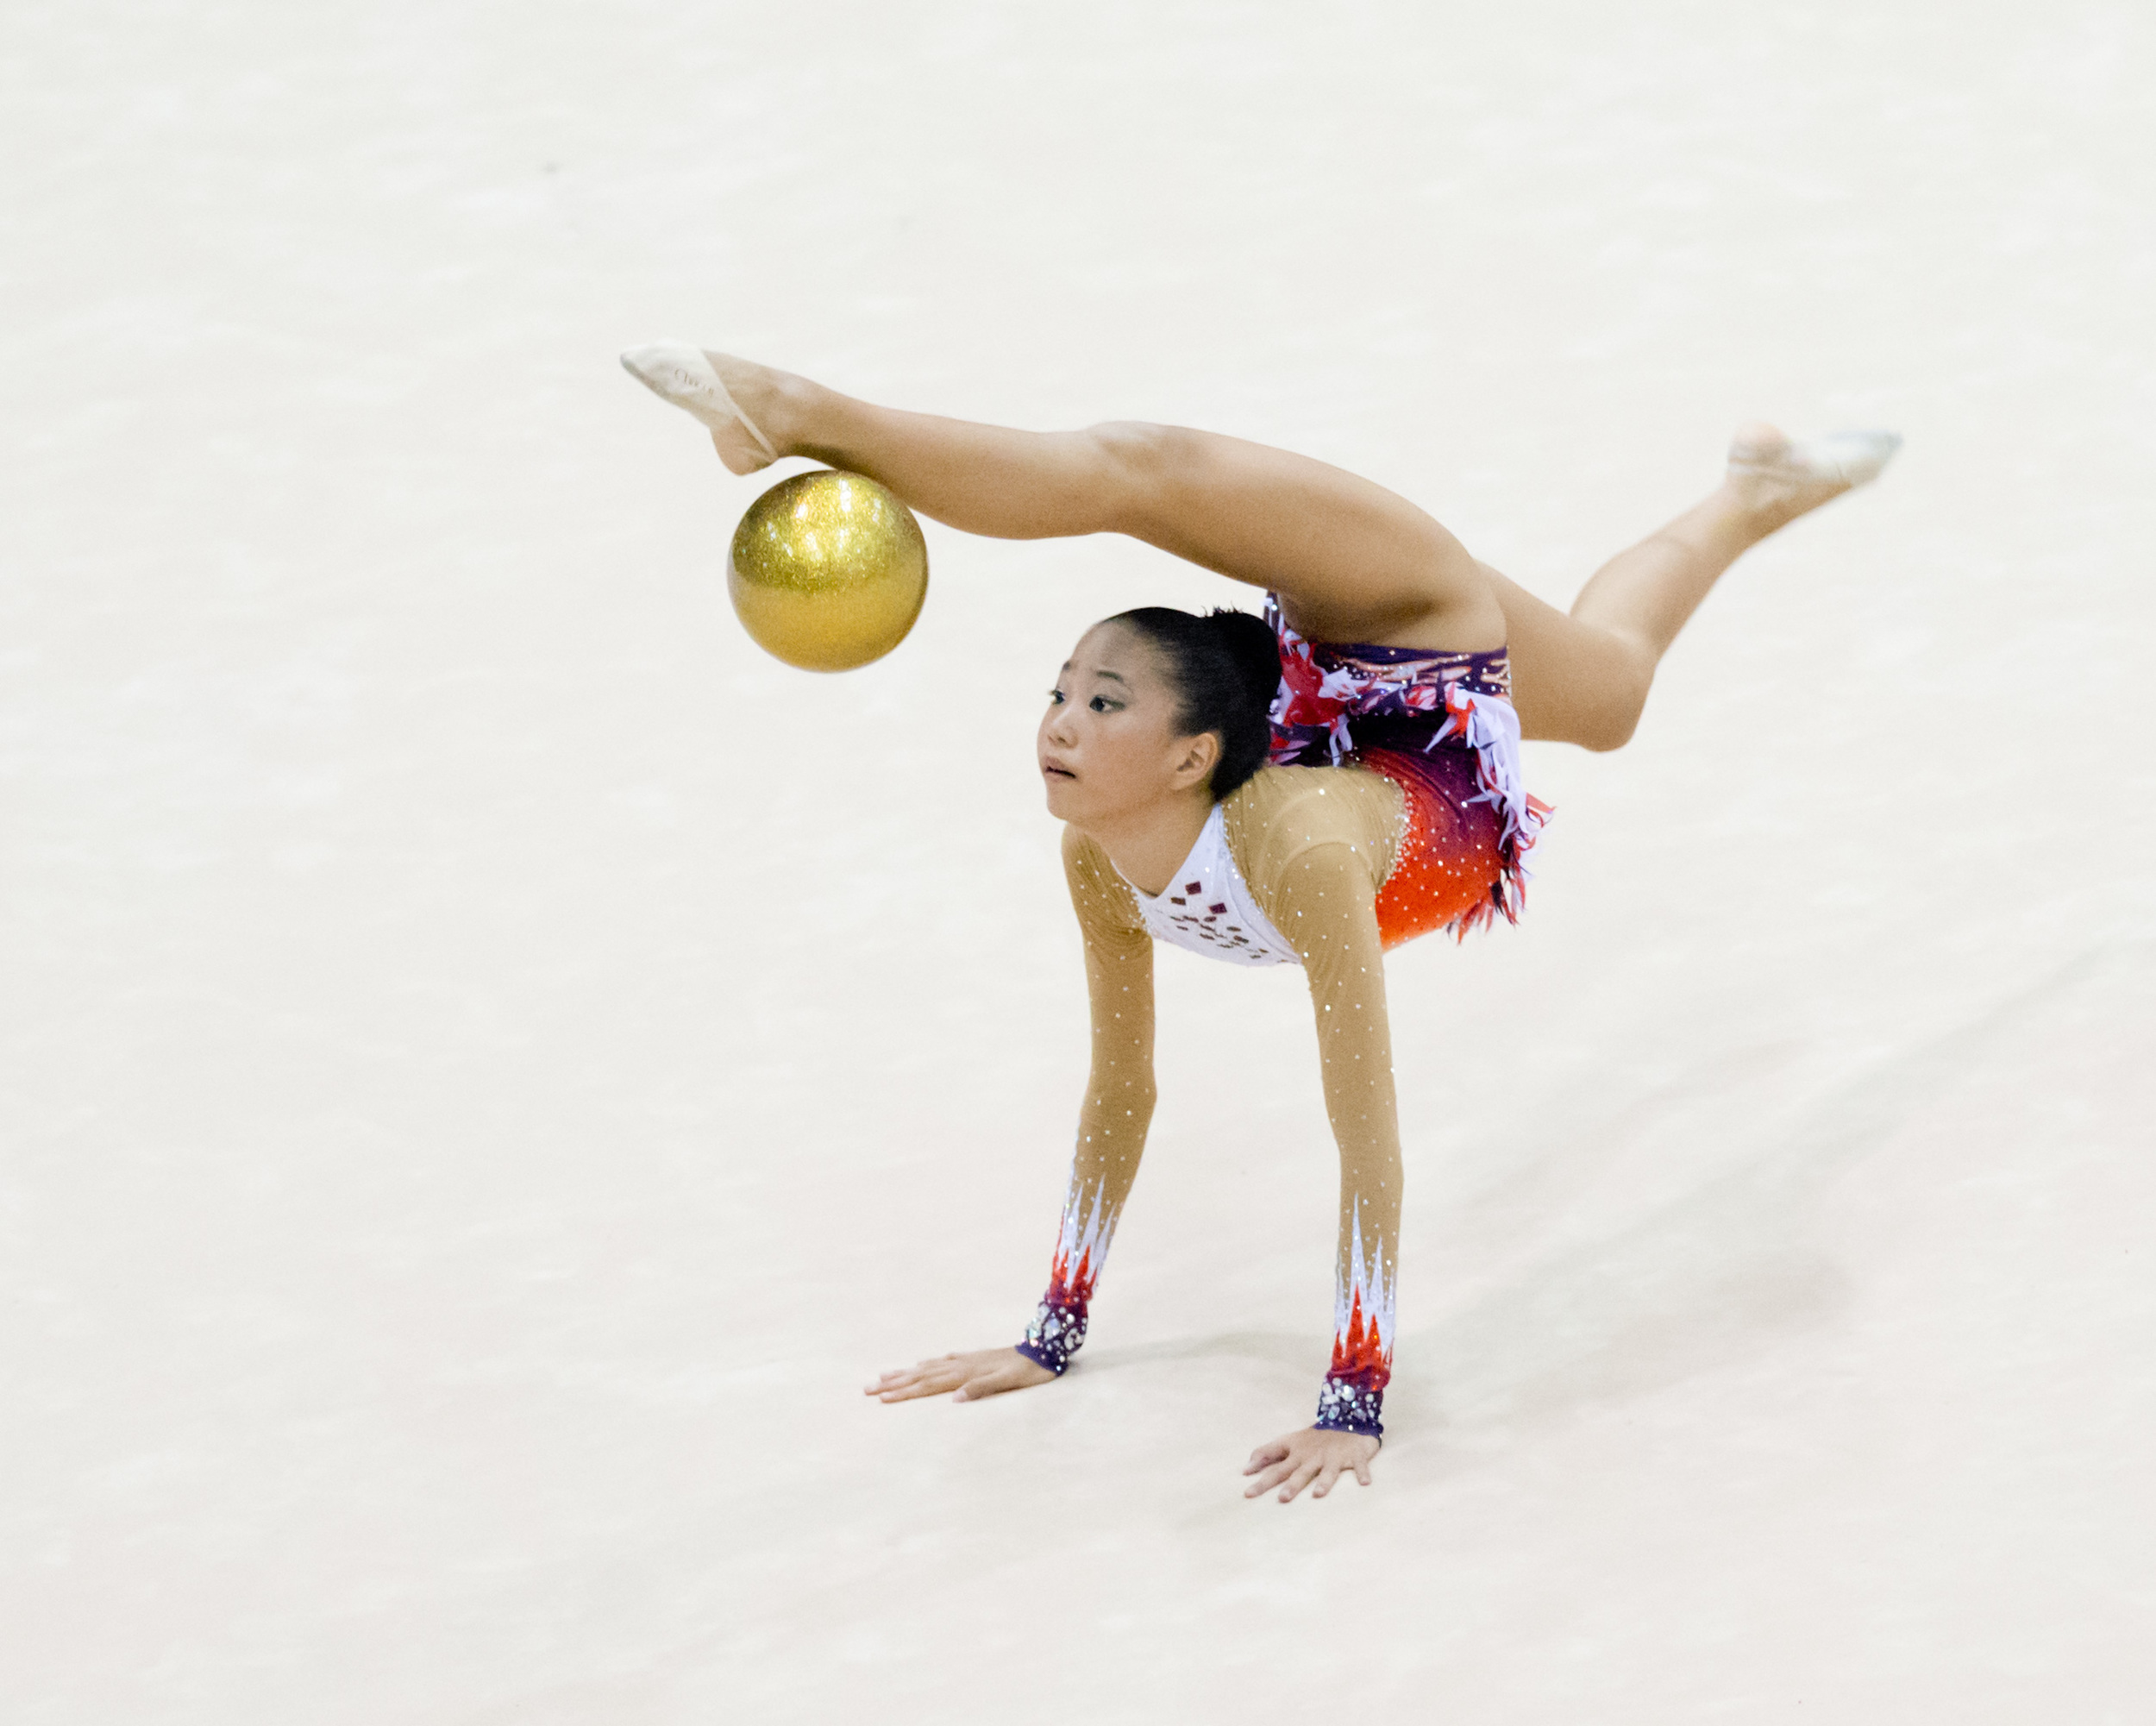 A gymnast bounces her ball during the Singapore Open at the Bishan Sports Hall.